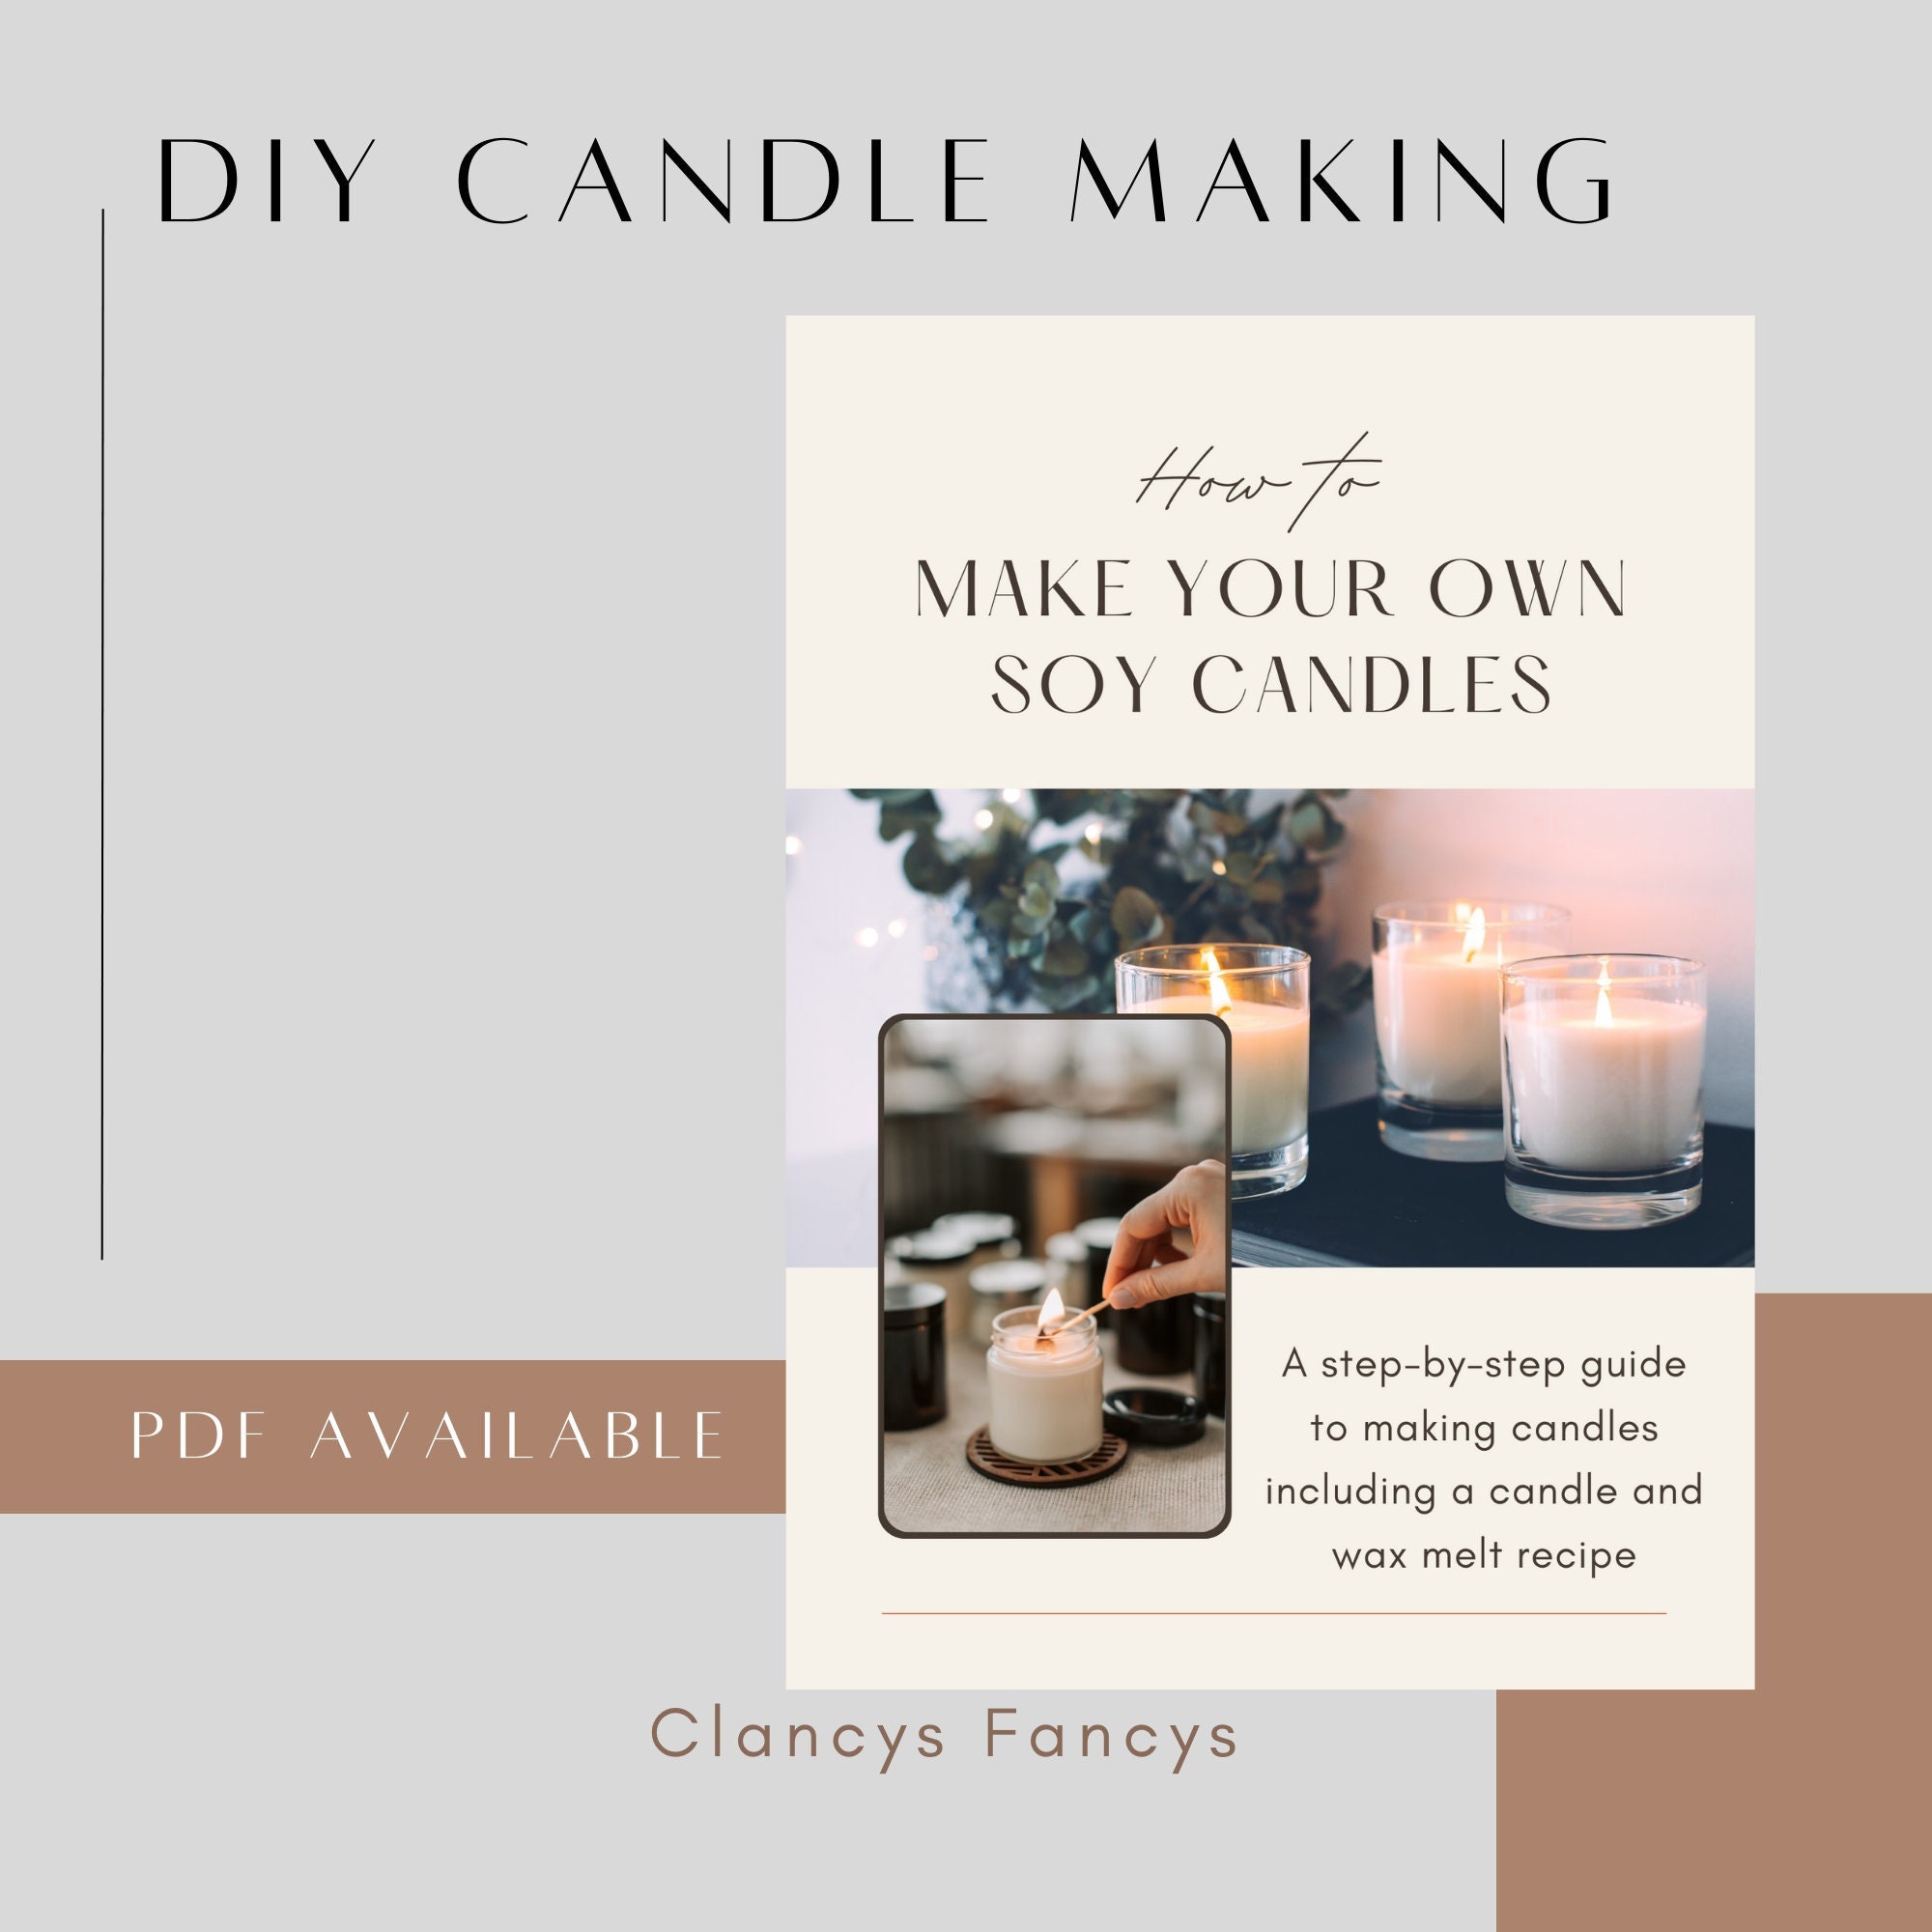 Hearts & Crafts DIY Complete Soy Wax Candle Making Kit - 1lb Soy Candle Wax  and All Candle Making Supplies Included and Candle Jars - Complete DIY